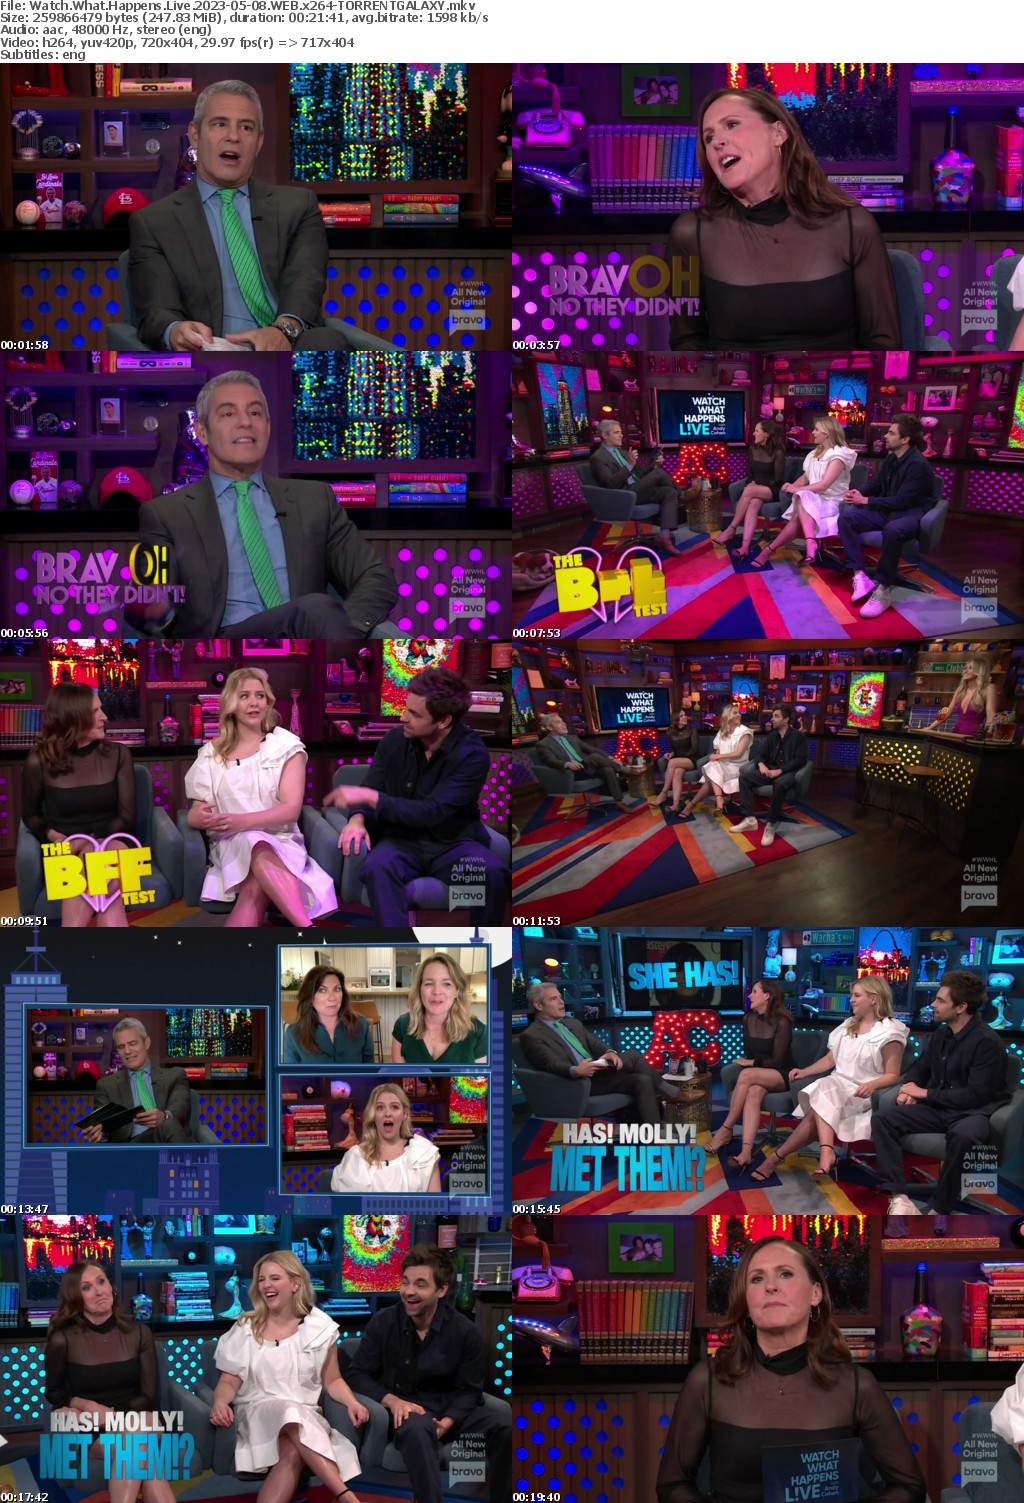 Watch What Happens Live 2023-05-08 WEB x264-GALAXY